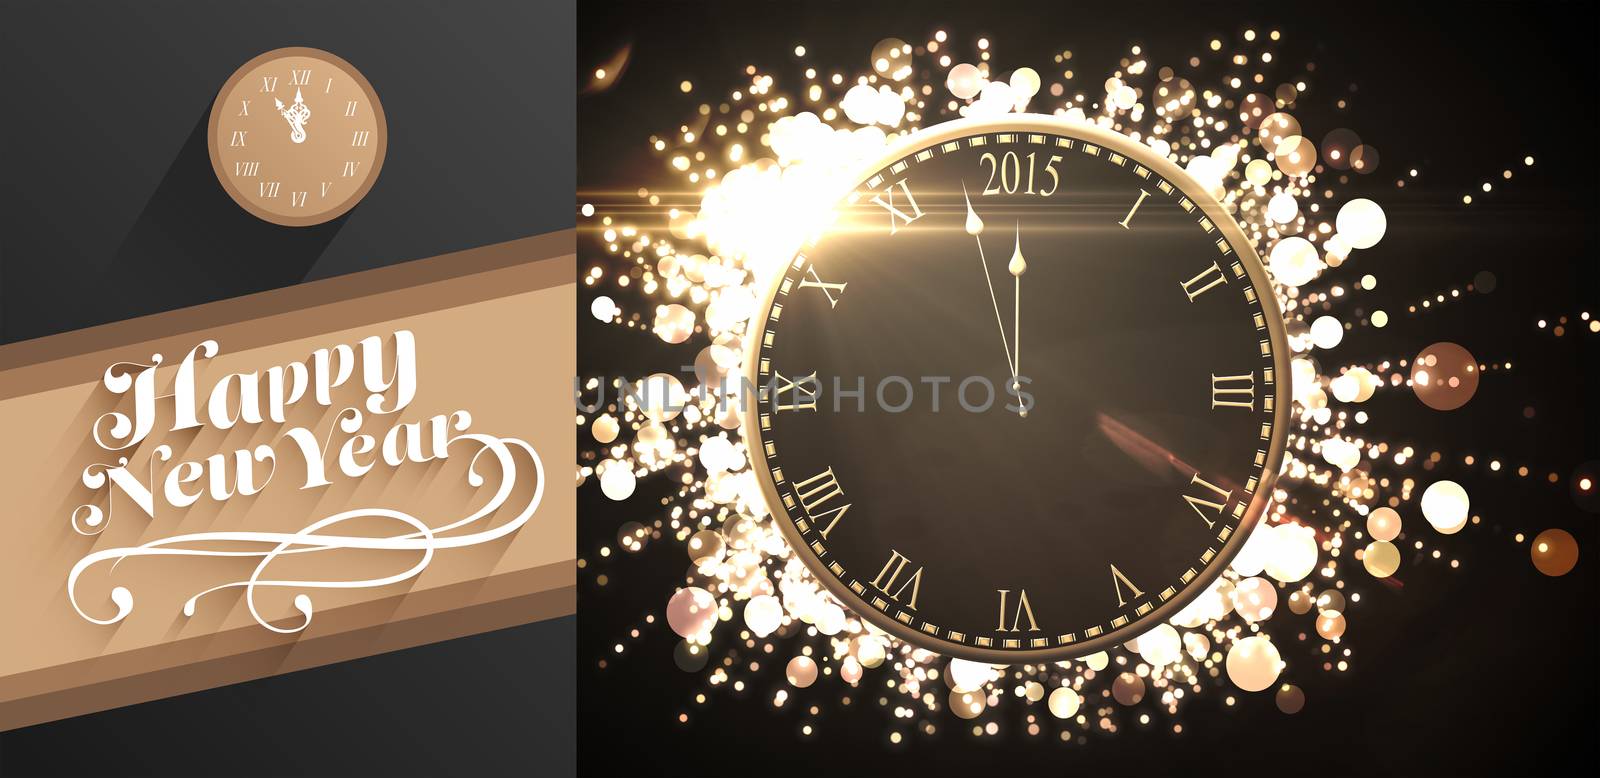 Composite image of classy new year greeting by Wavebreakmedia